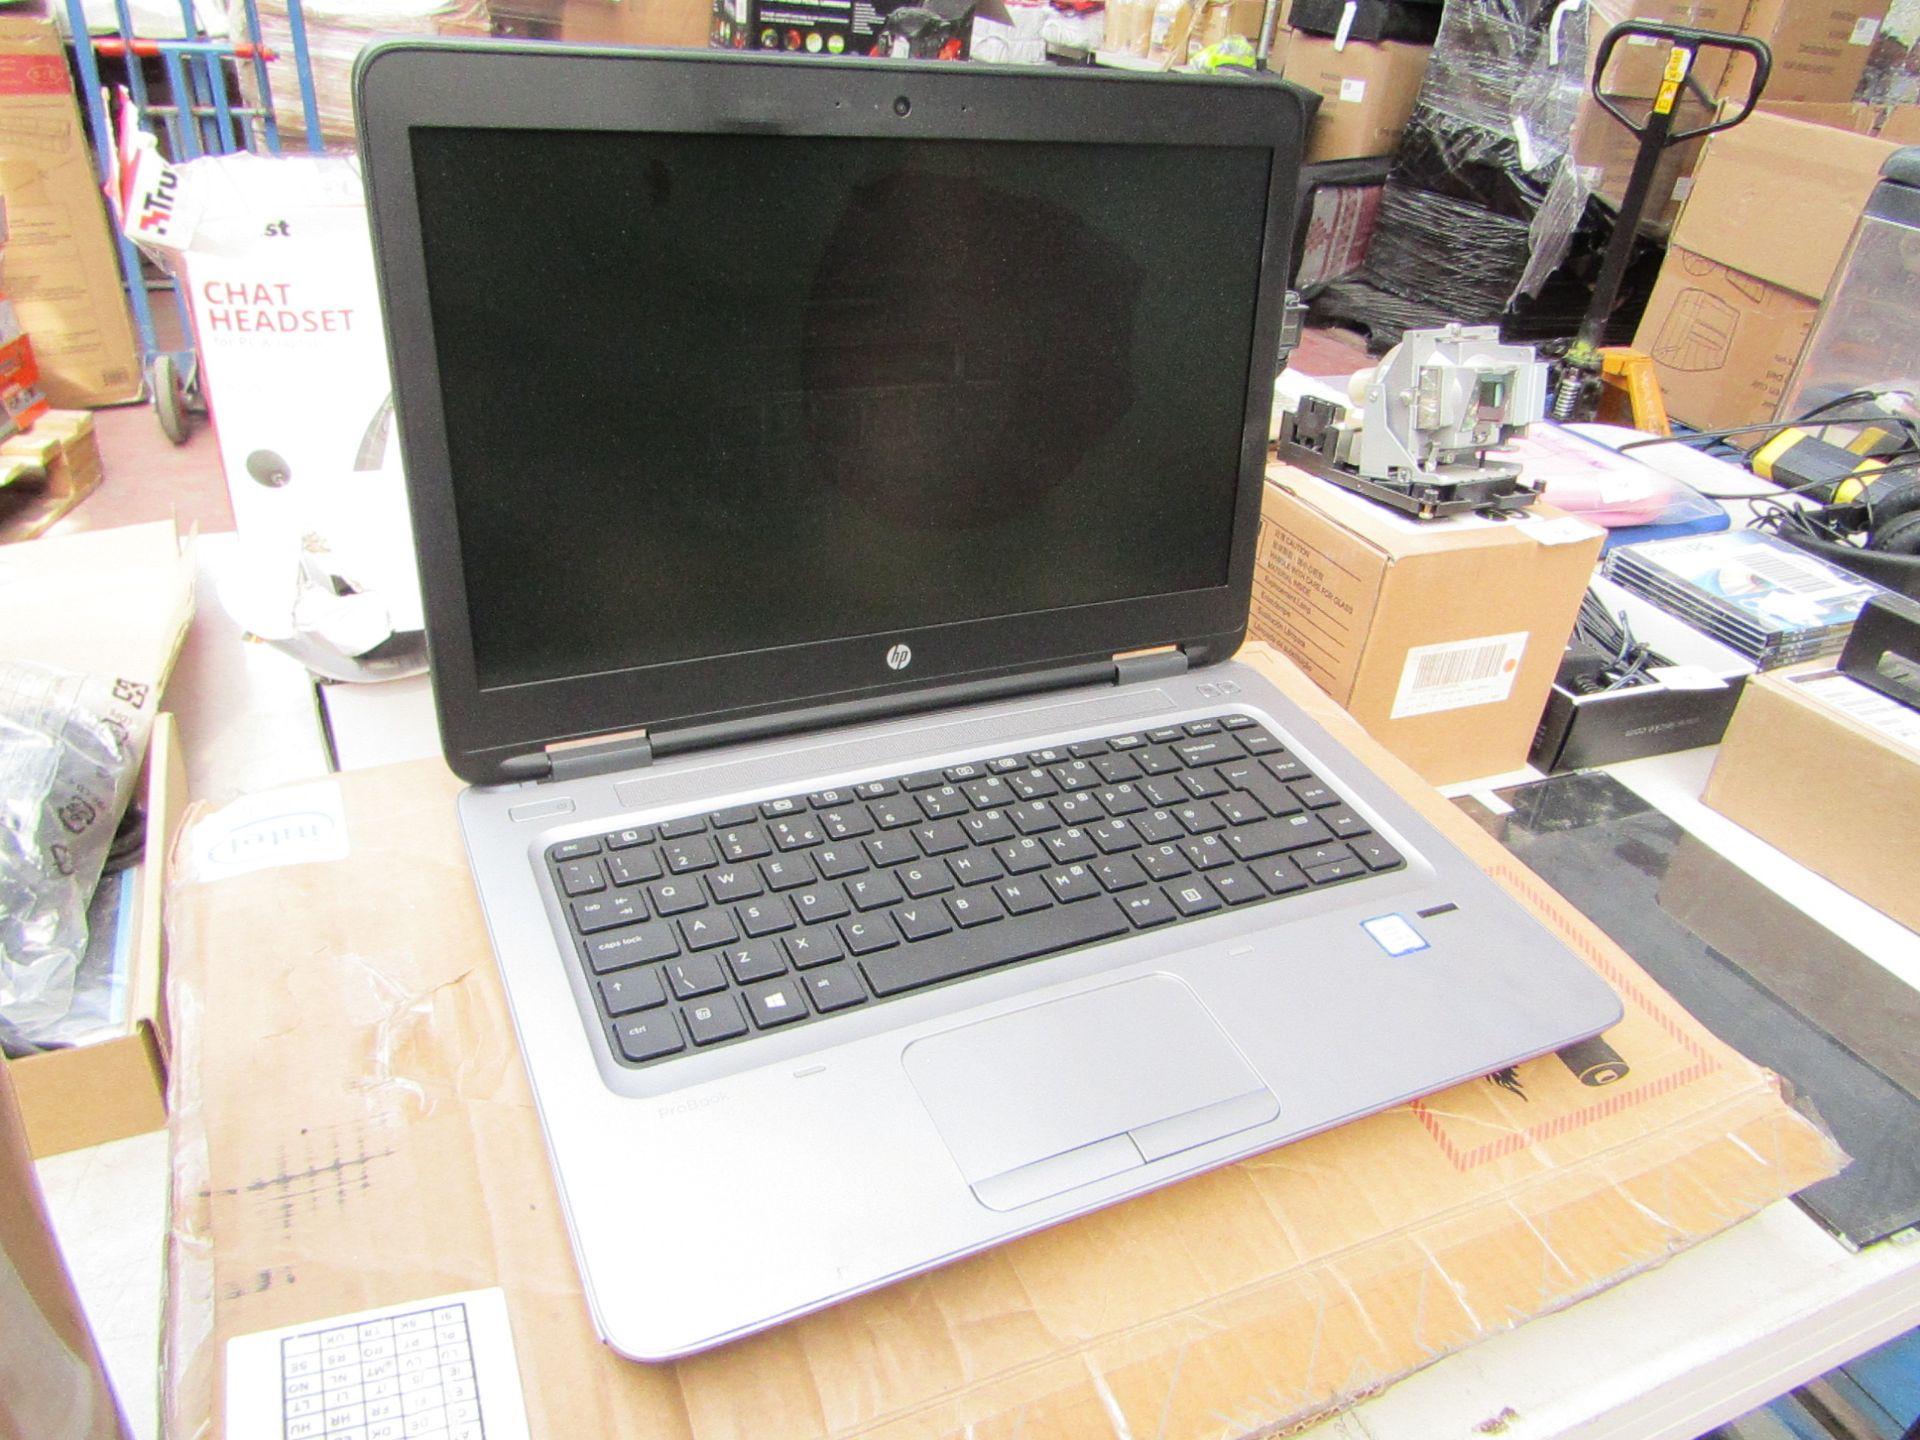 HP ProBook 640 G2 with an I5 processor, smashed screen. Boxed, no charger, when new it retails for